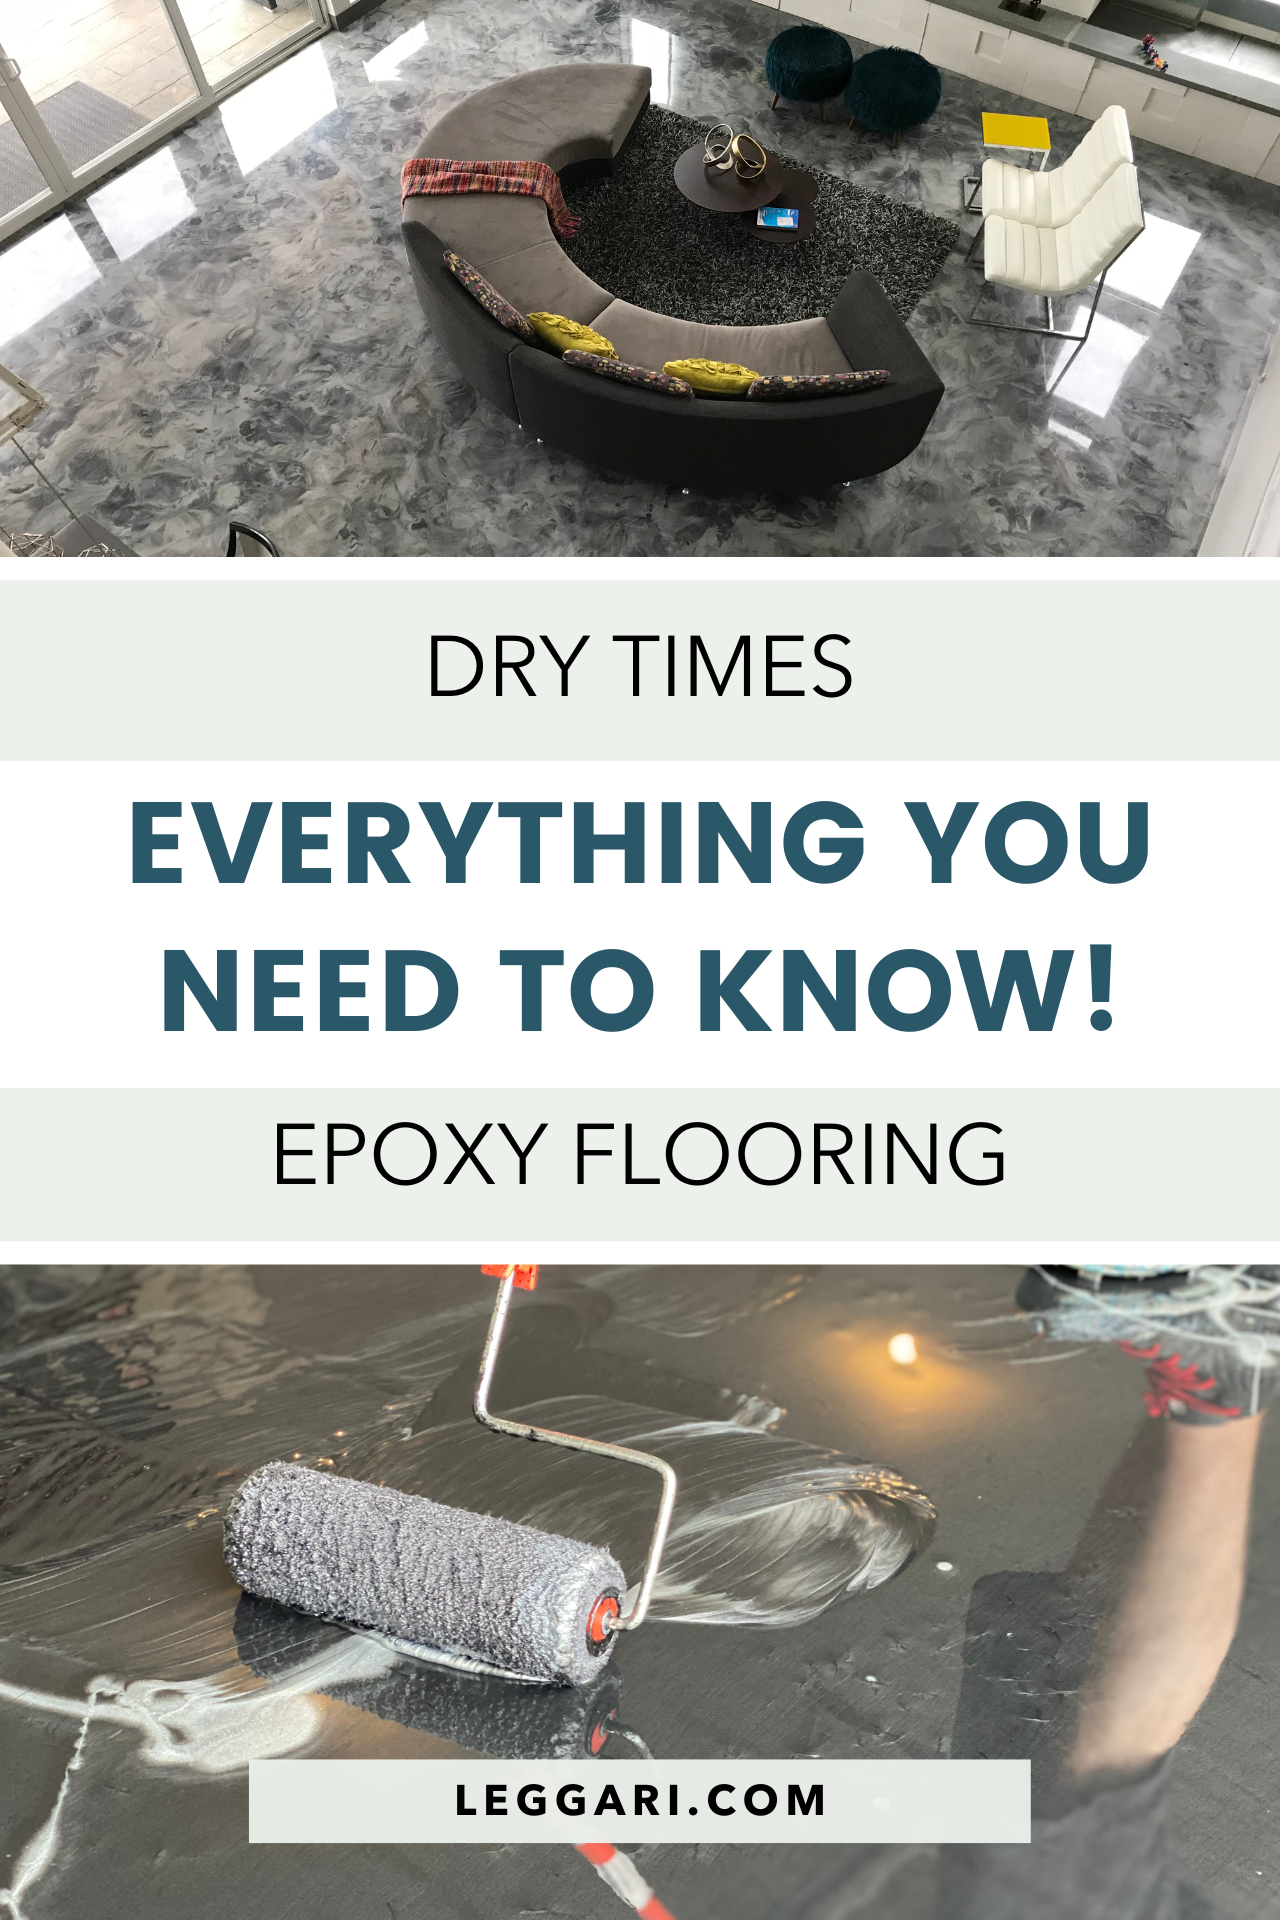 Epoxy: What You Need to Know